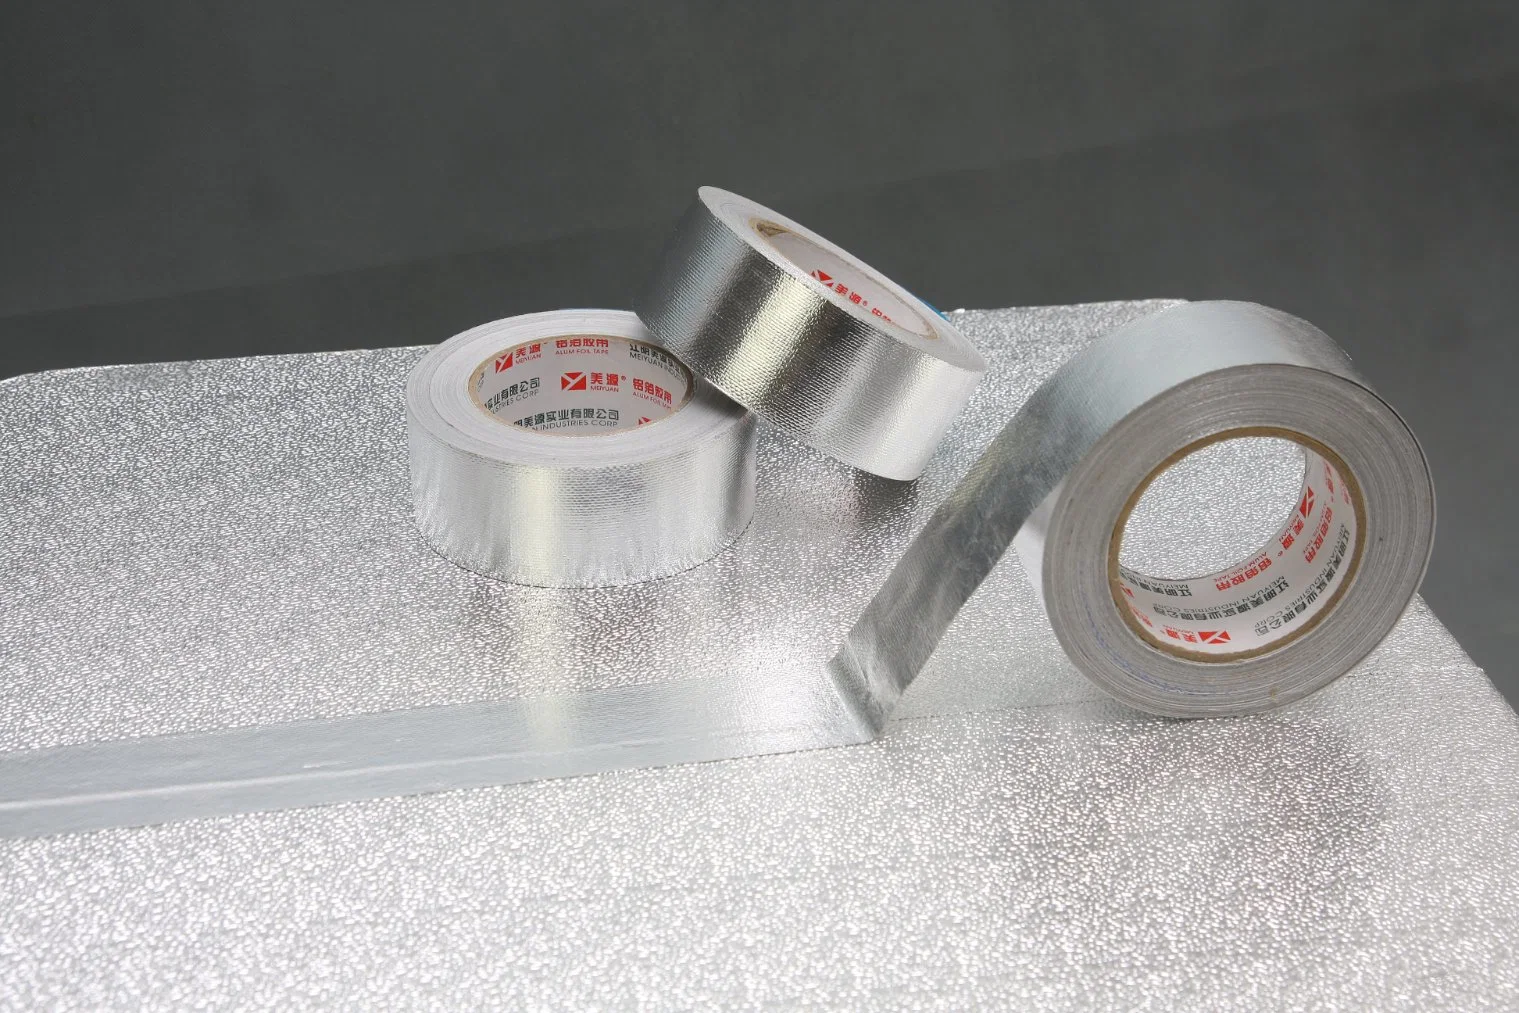 Meiyuan Corrosion Resistant Kitchen Use Aluminum Foil Adhesive Tape